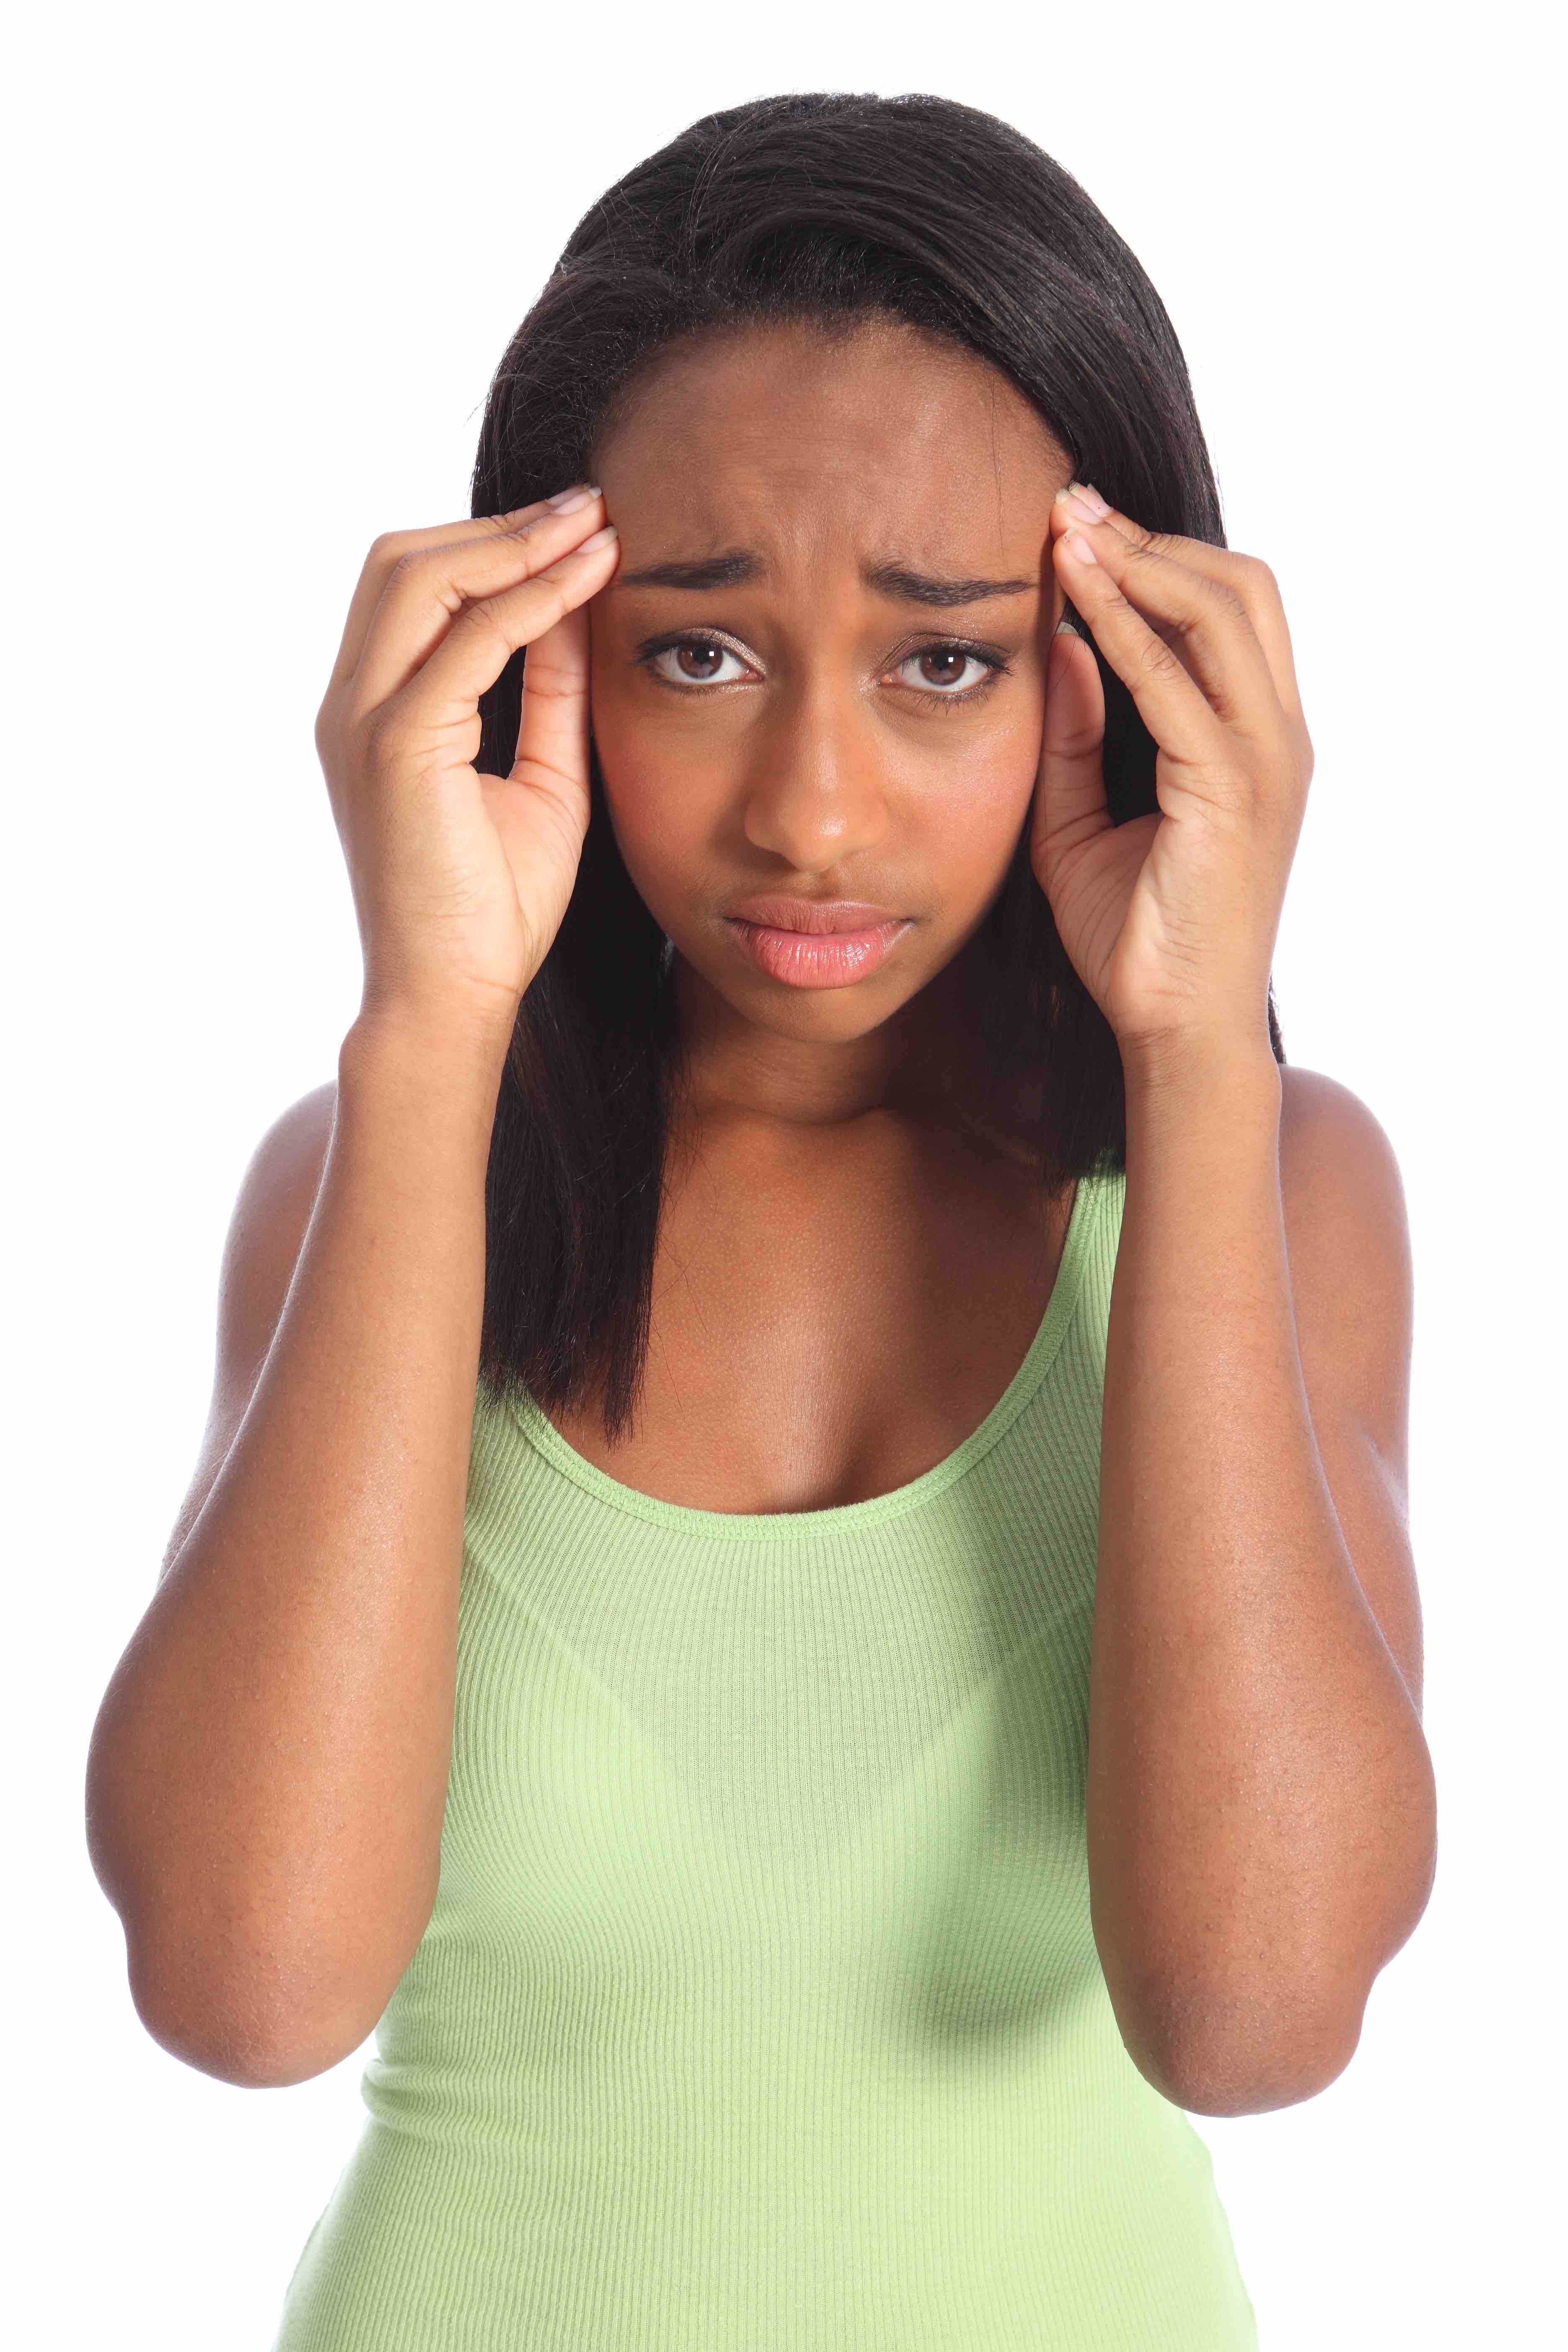 Does Your Child Suffer From Frequent Severe Headaches? - Buffalo ...